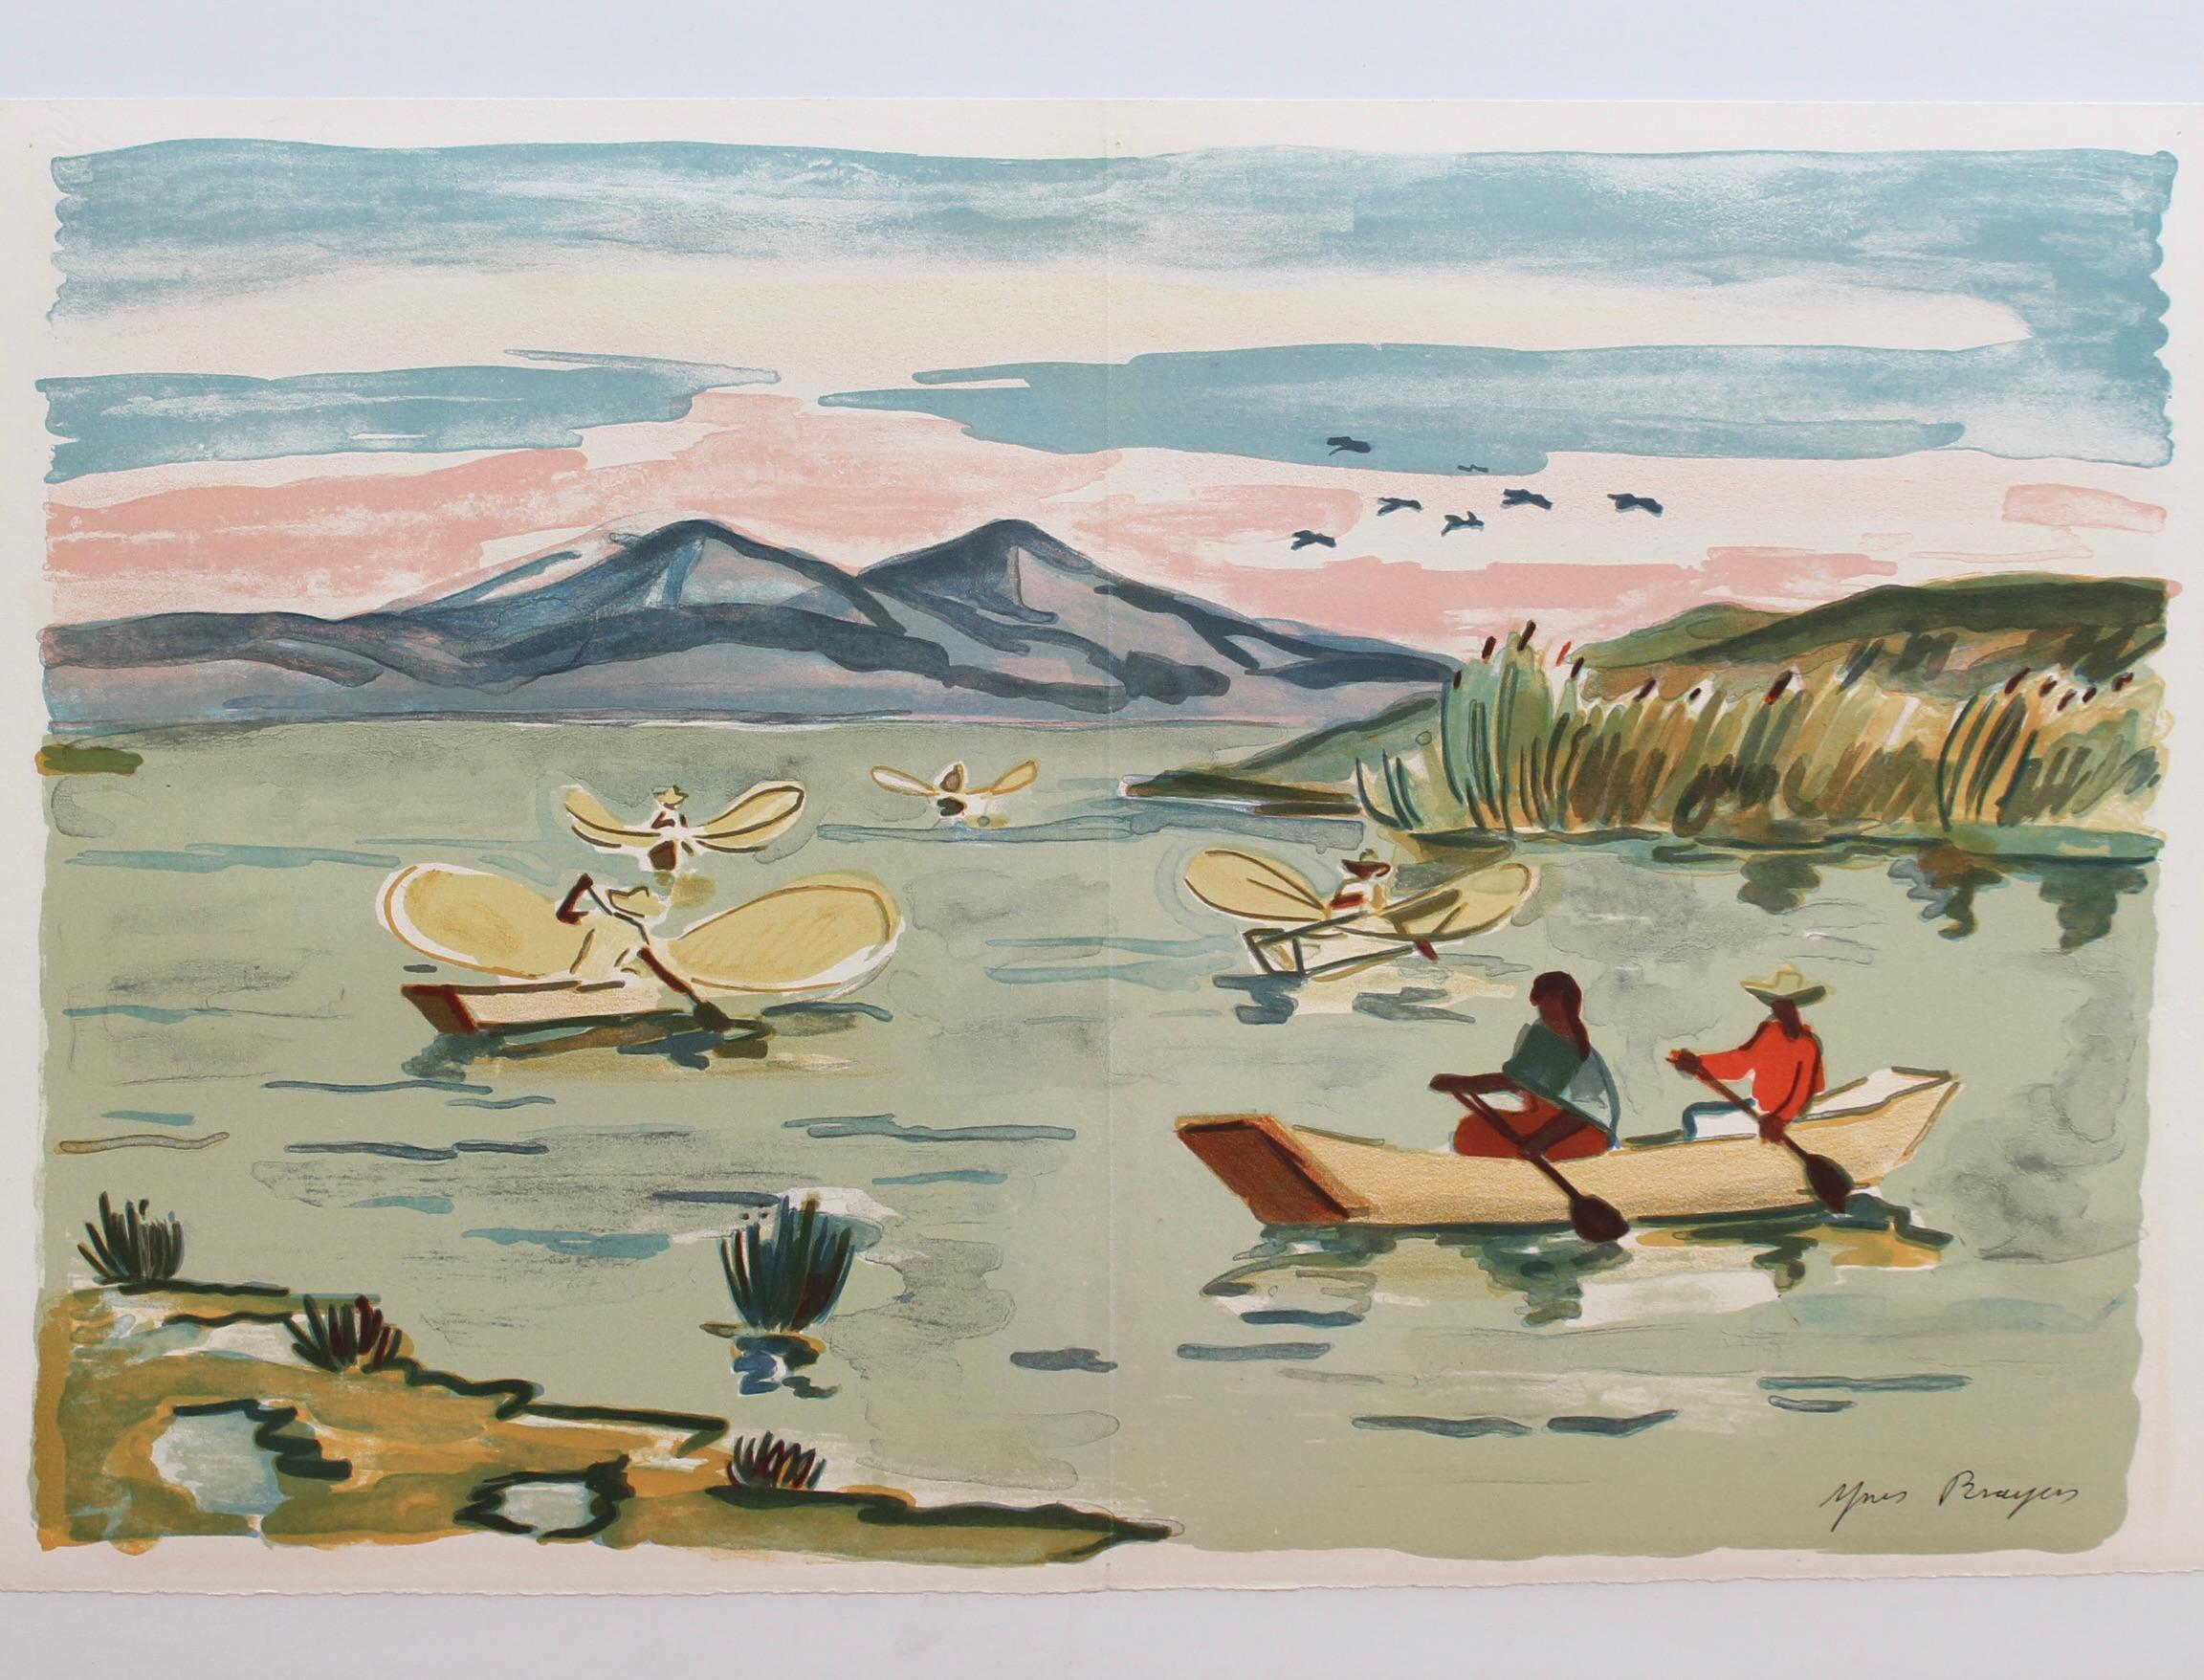 'Mexican Fishermen in Lake Patzcuaro', lithograph by Yves Brayer (1963). Unframed. The artist, Yves Brayer, spent time painting in Mexico in 1963, one of the many worldwide destinations to which he travelled with the intention of portraying life in